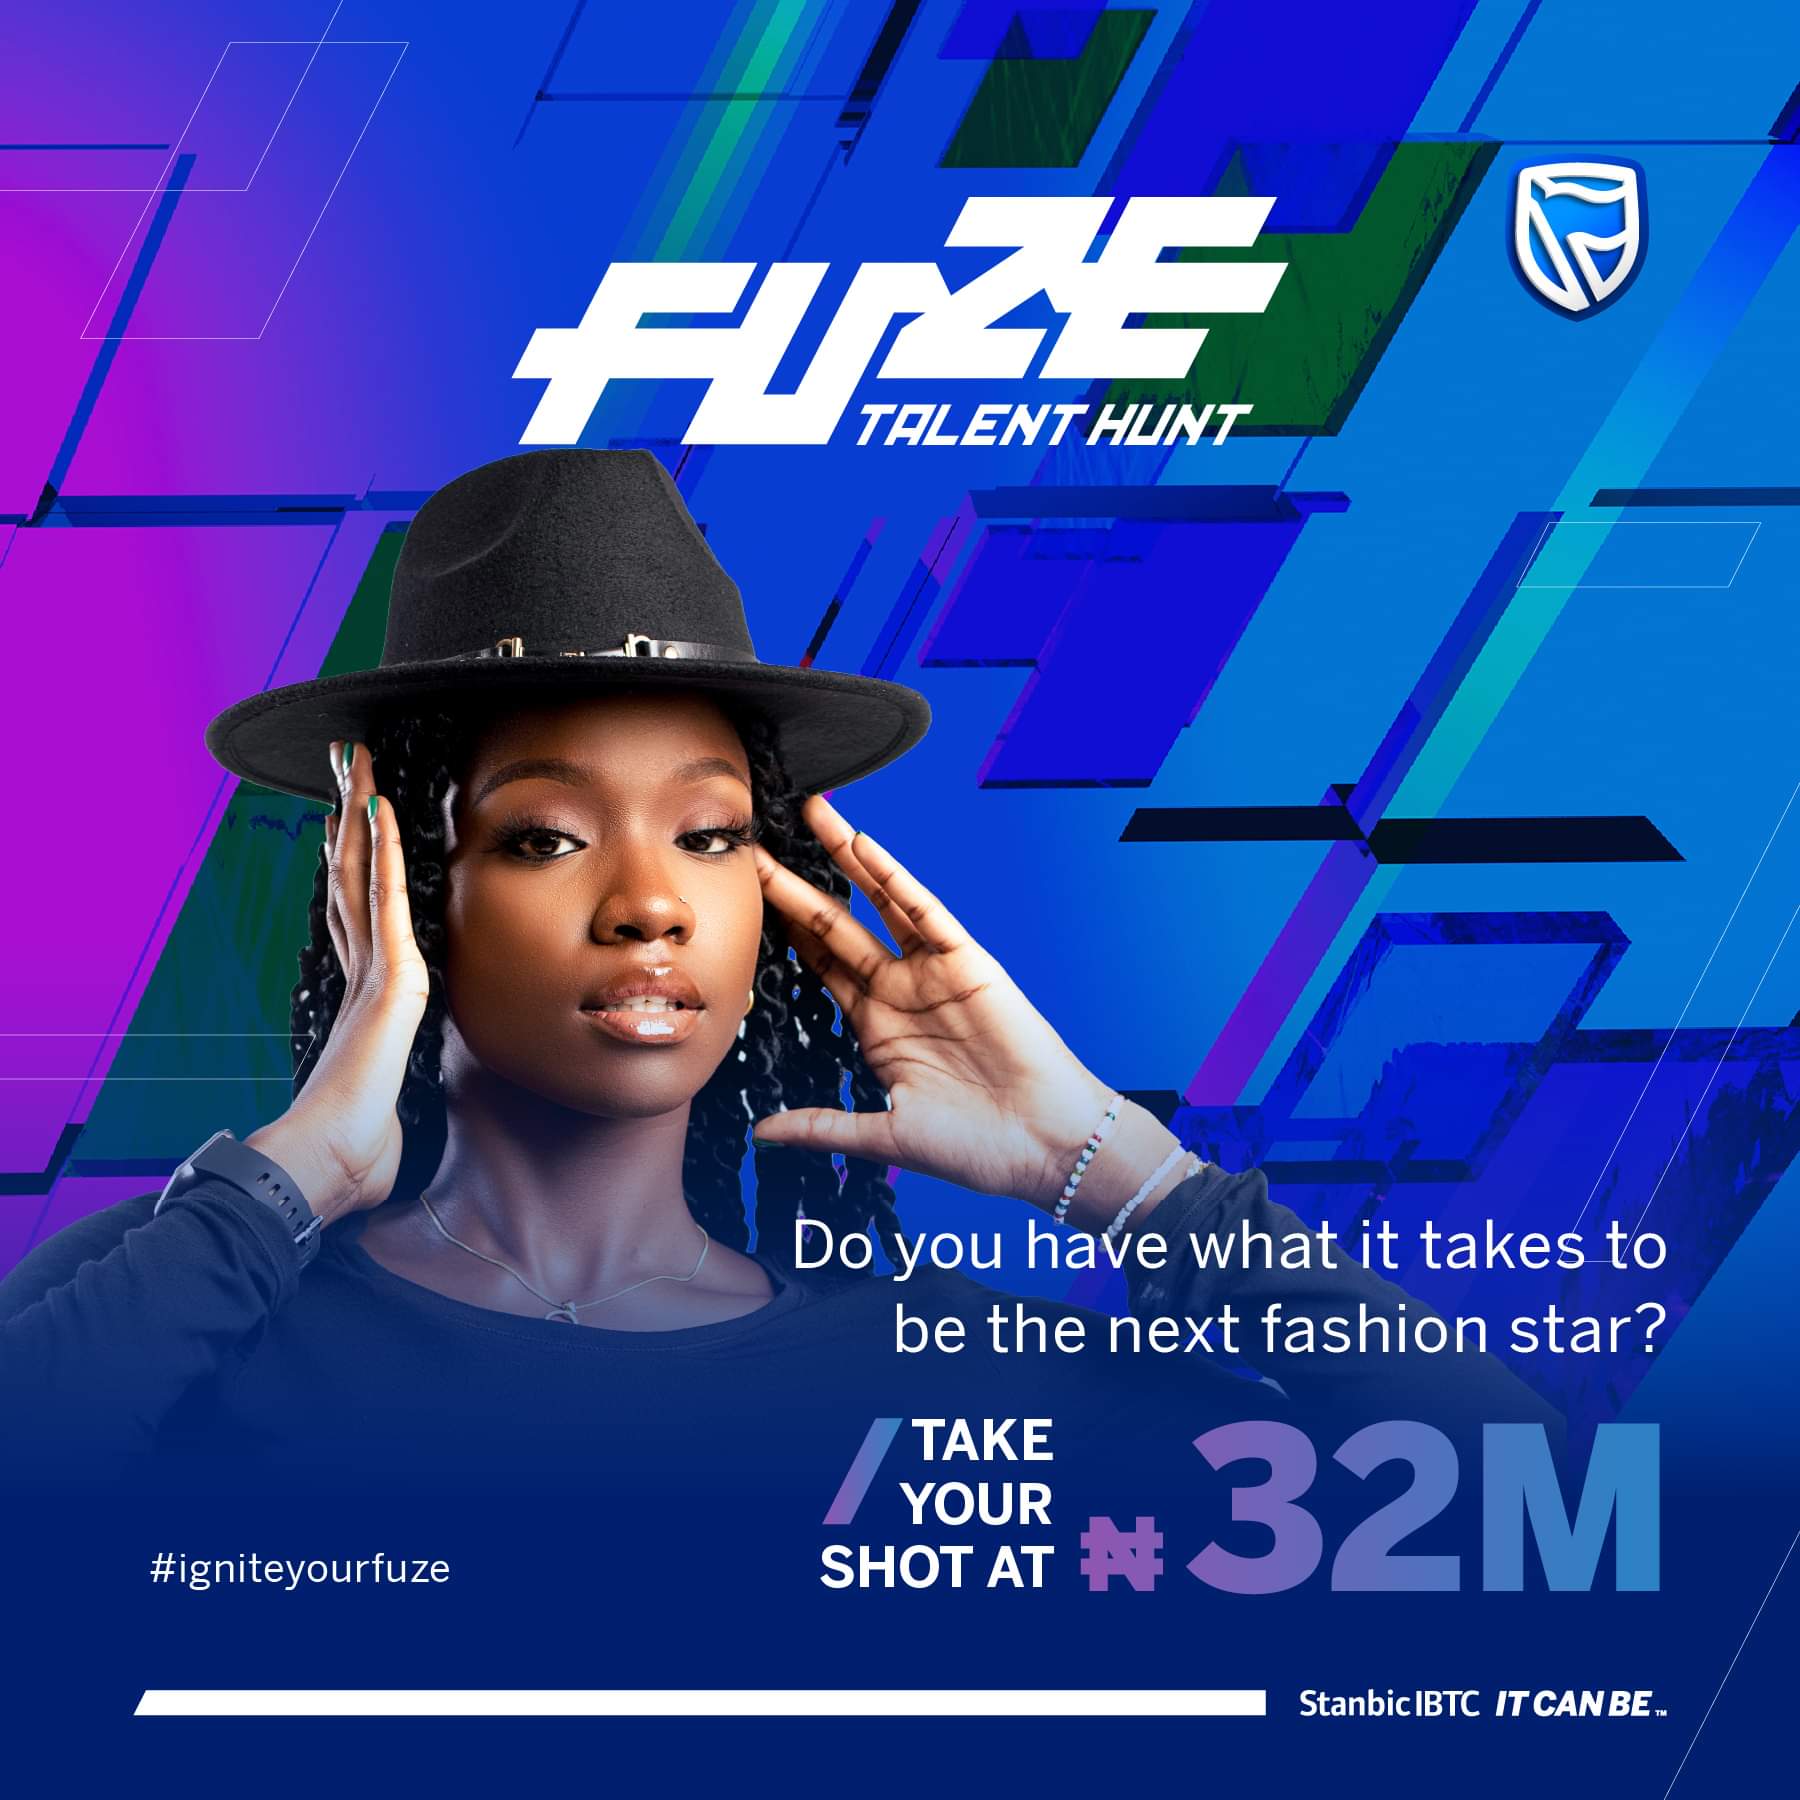 Stanbic IBTC FUZE Festival for Fashion Designers & Tech Innovators (win N32m grand prize) – Call for Applications